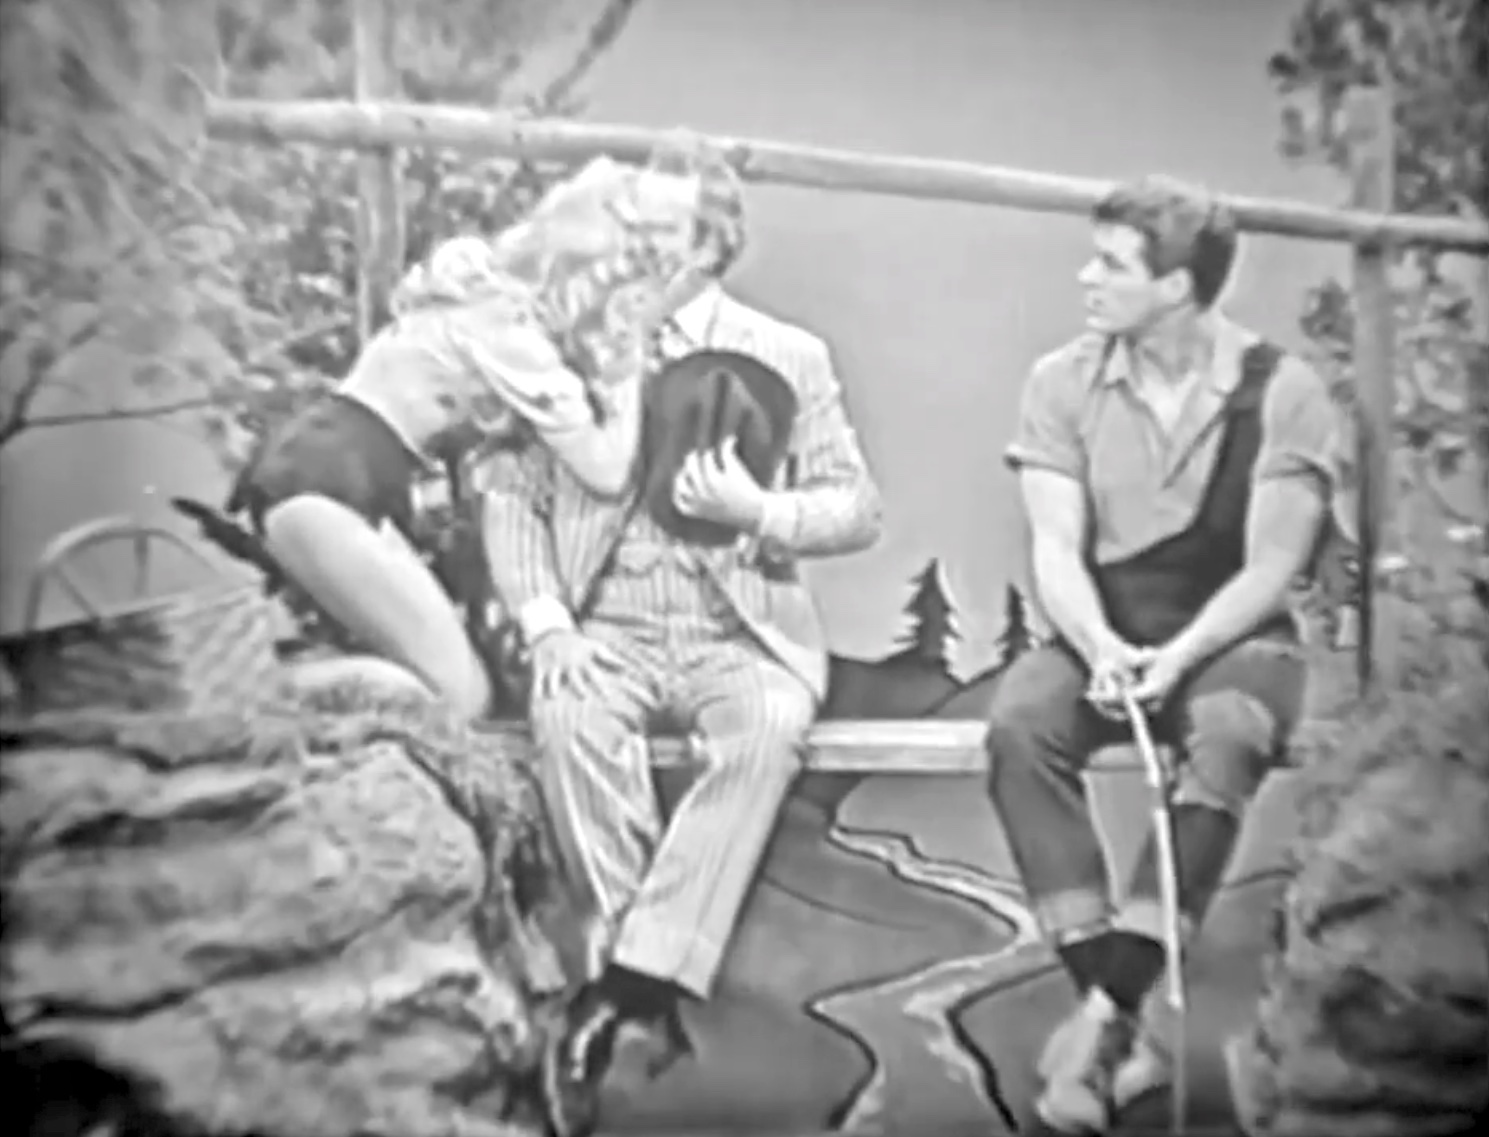 Daisy Mae kisses Clem while Li'l Abner watches